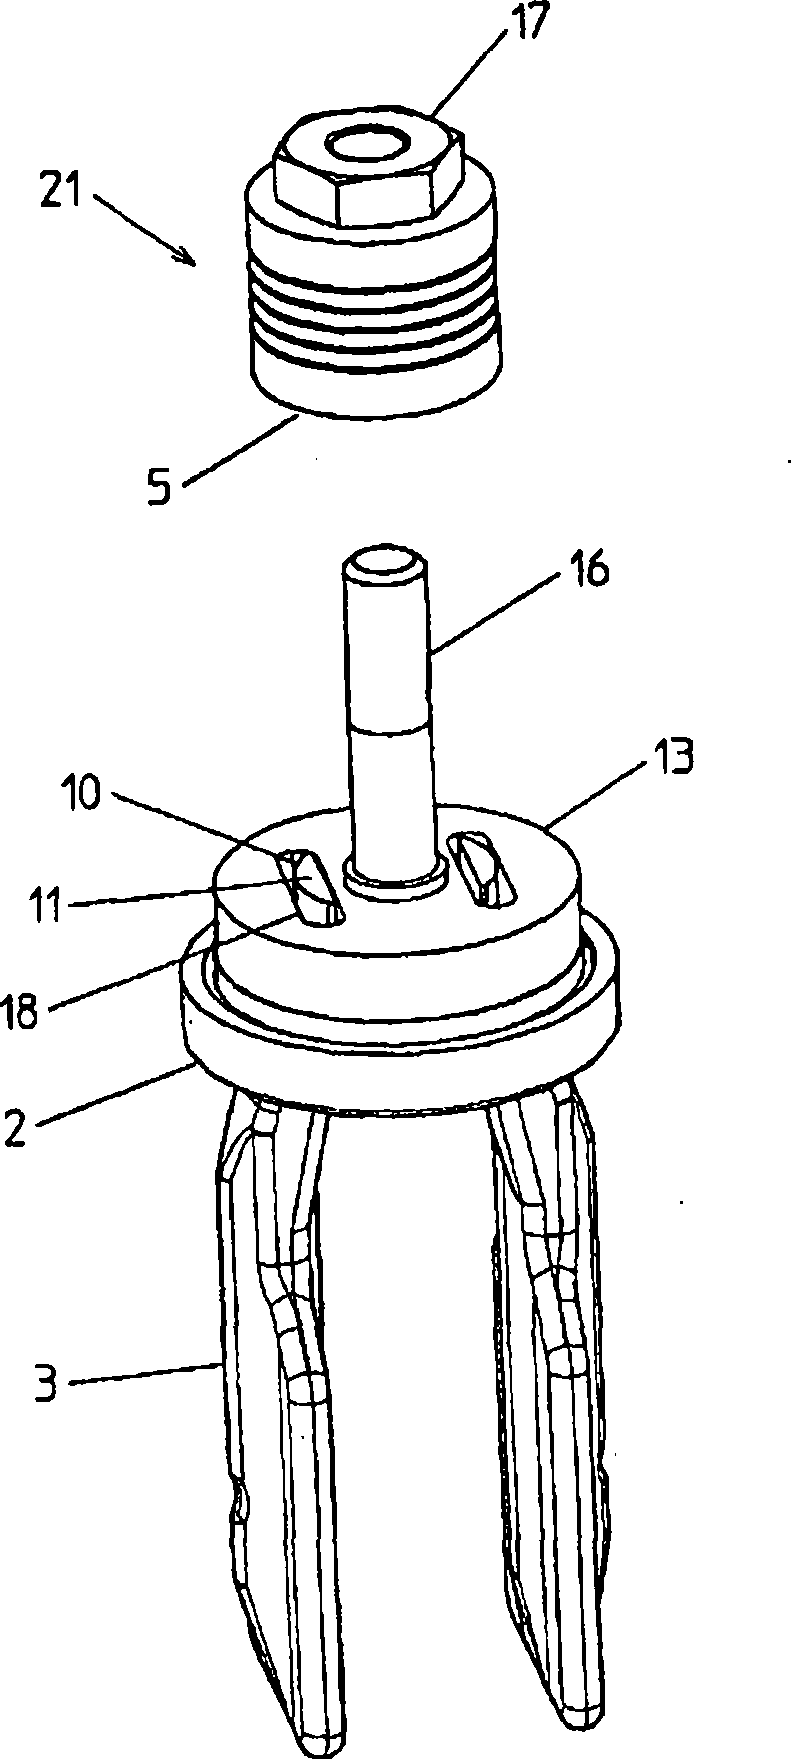 Fill level measuring device for determining and/or monitoring a fill level